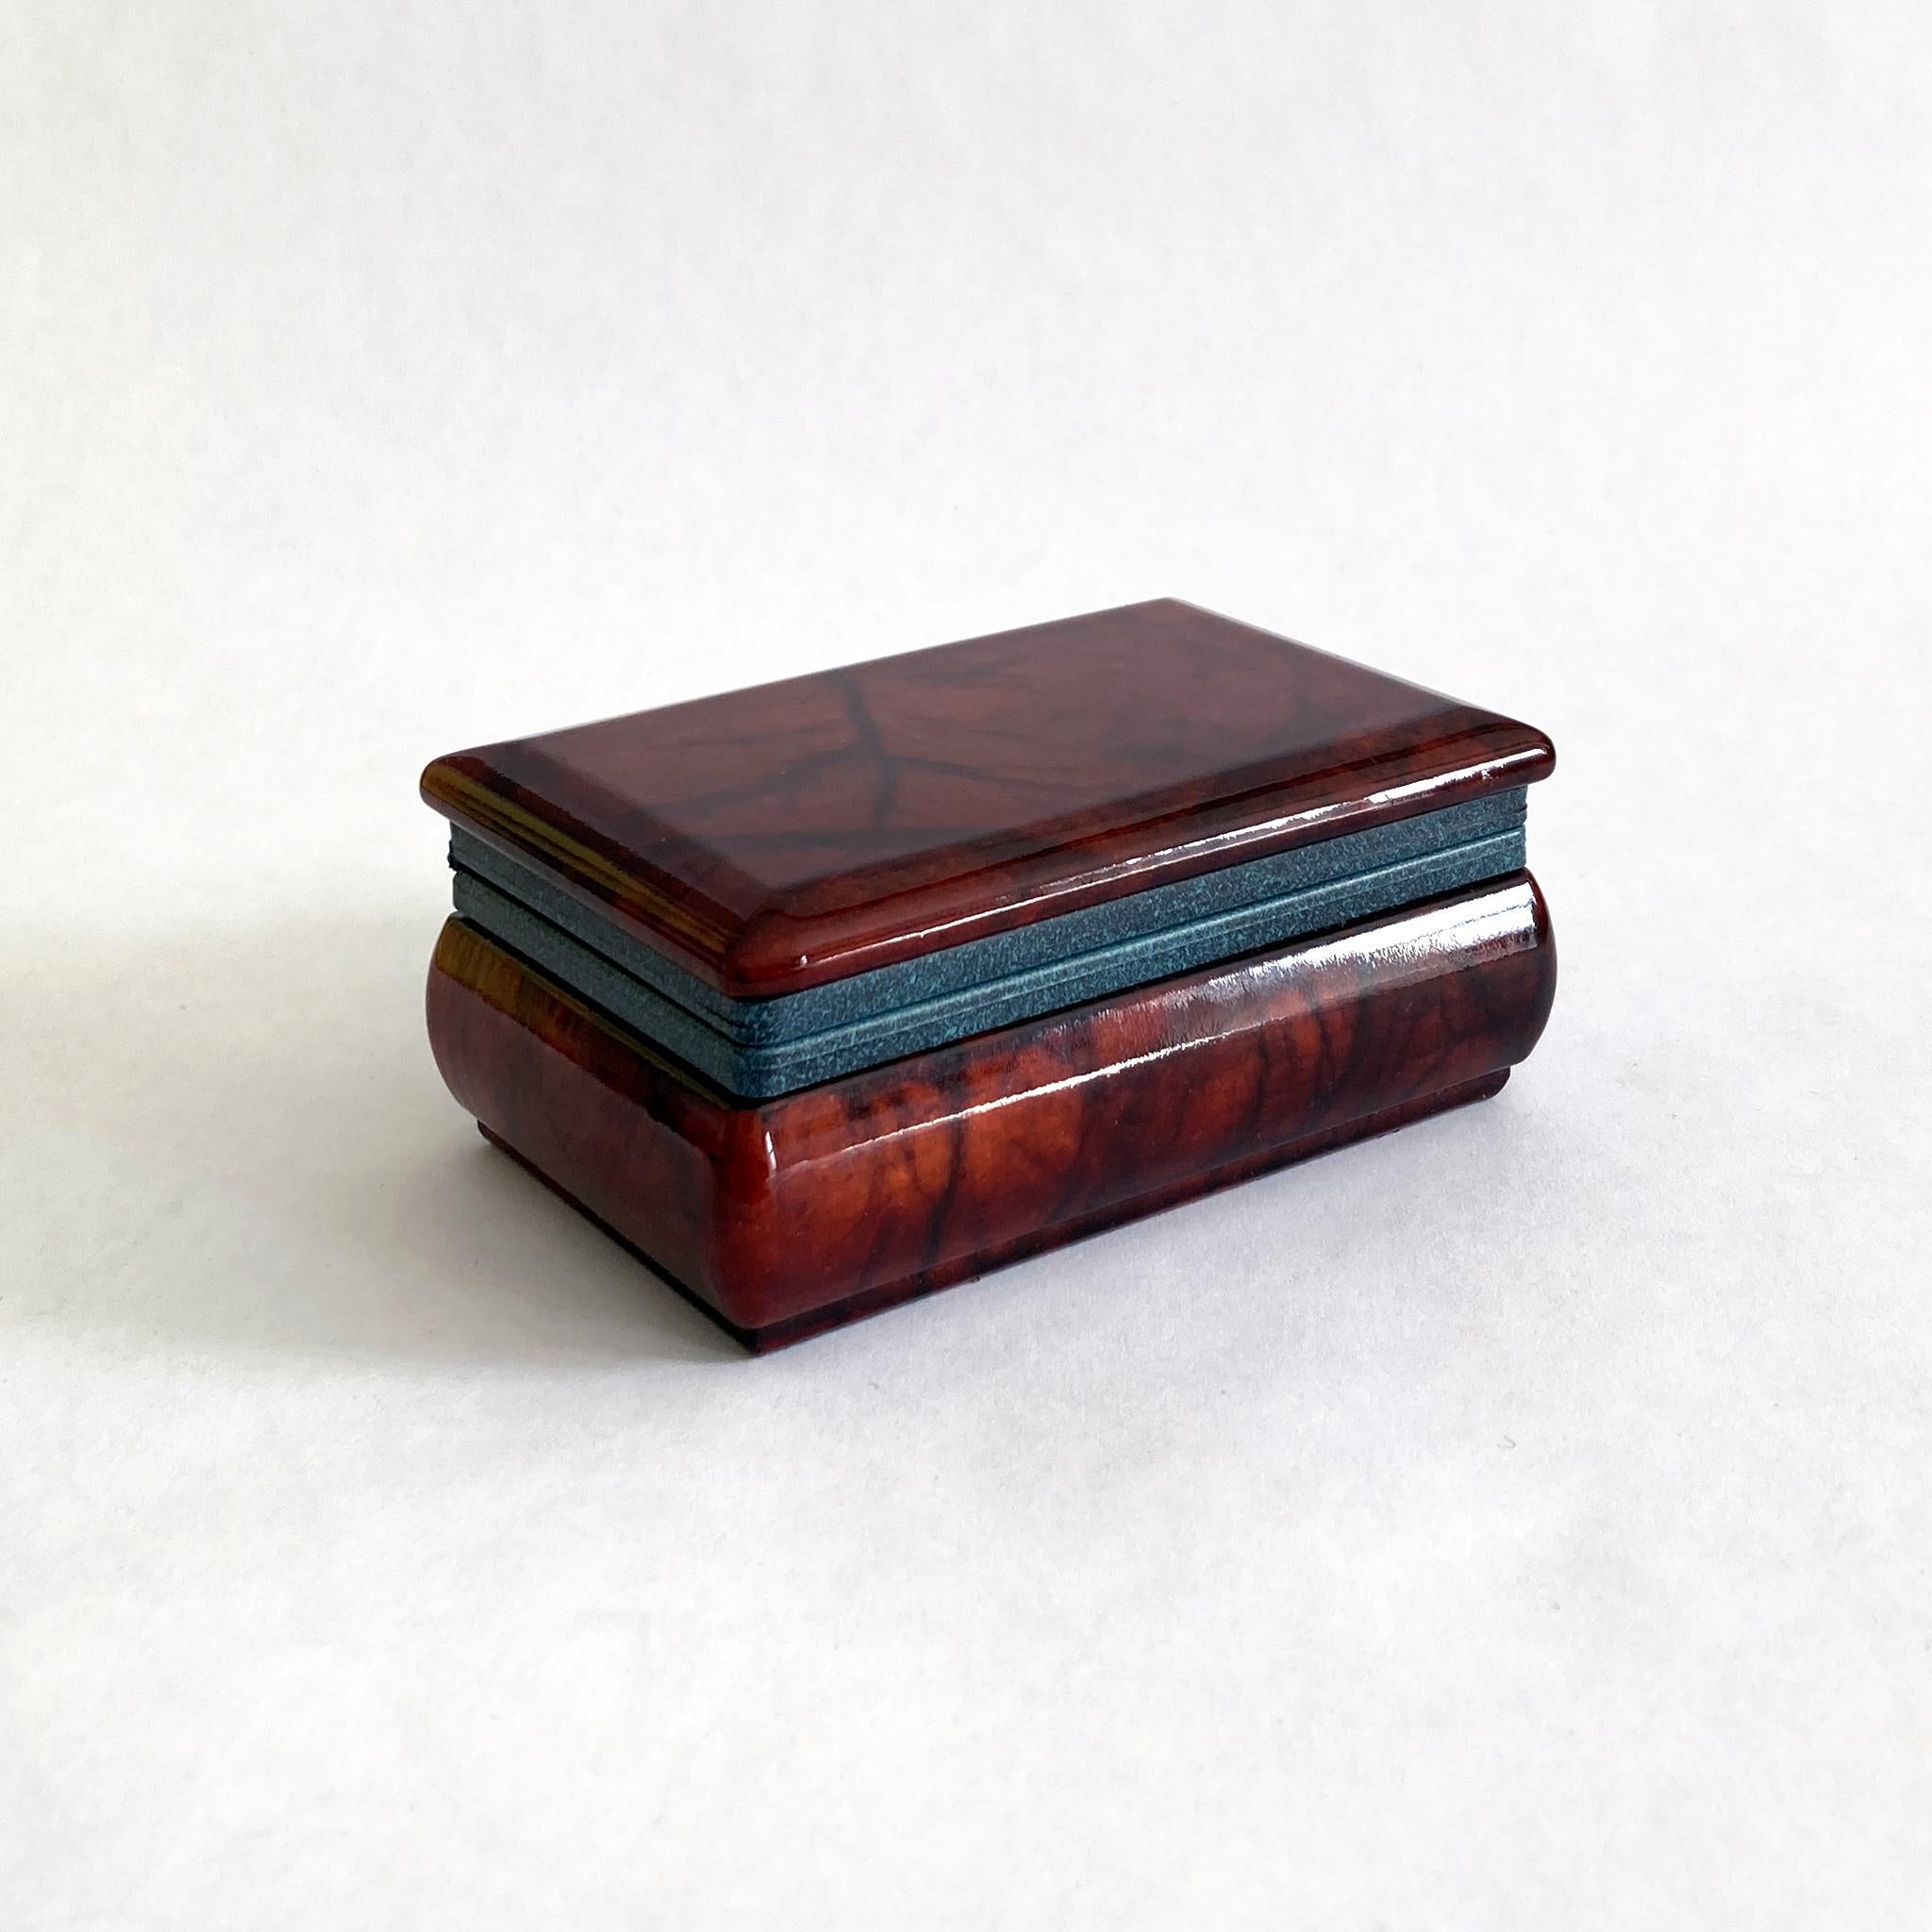 Beautiful petite brown/ red hand carved alabaster hinged box. The brownish red alabaster contrasts beautifully with the blue toned hinge hardware. This piece looks great as part of a group, or independently on a dresser or side table. See photos of